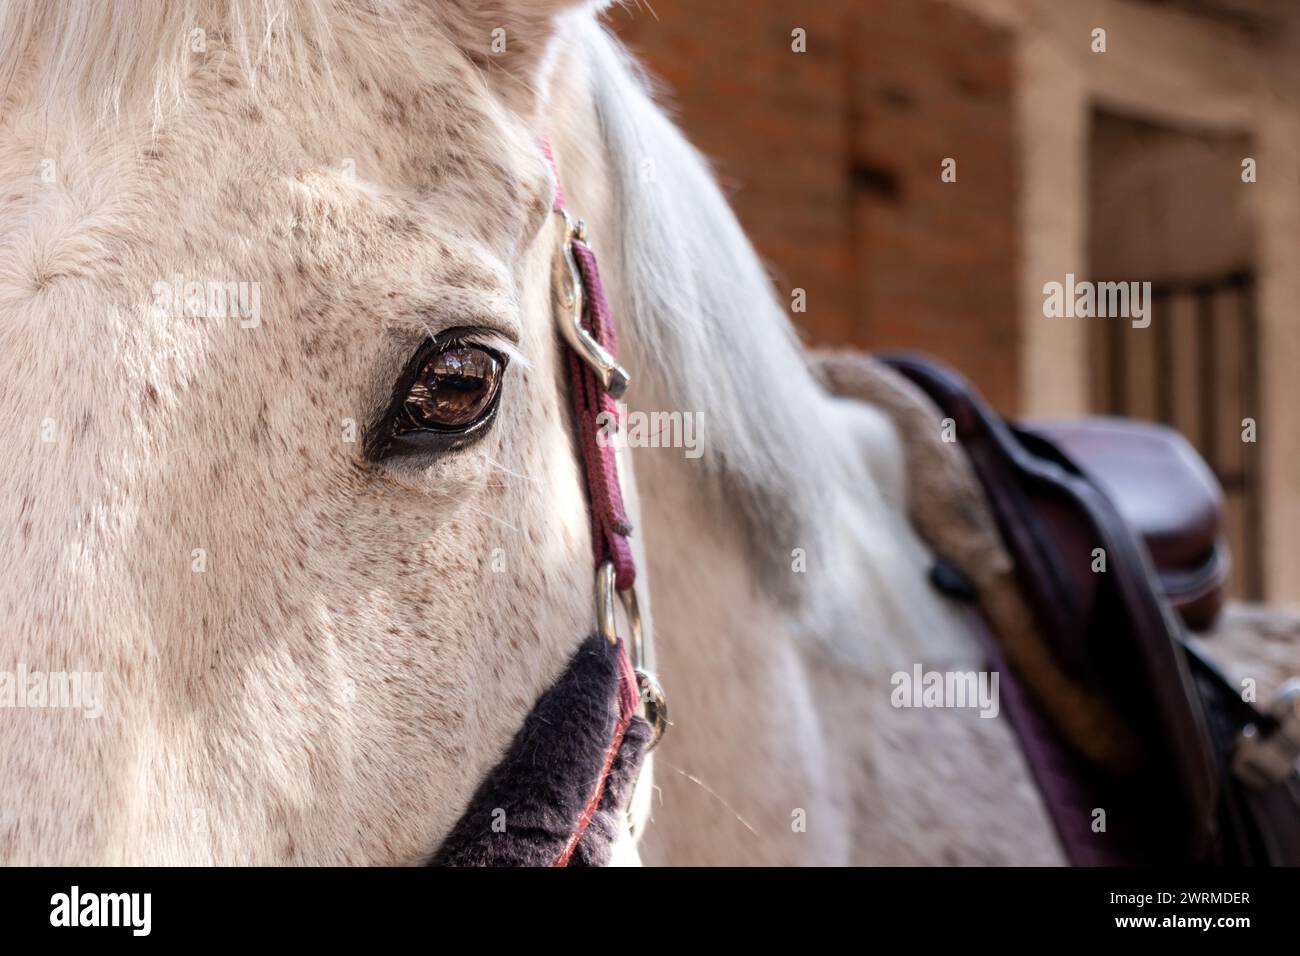 A detailed close-up of a white horse's face focusing on its thoughtful eye, adorned with a bridle and reins. Stock Photo